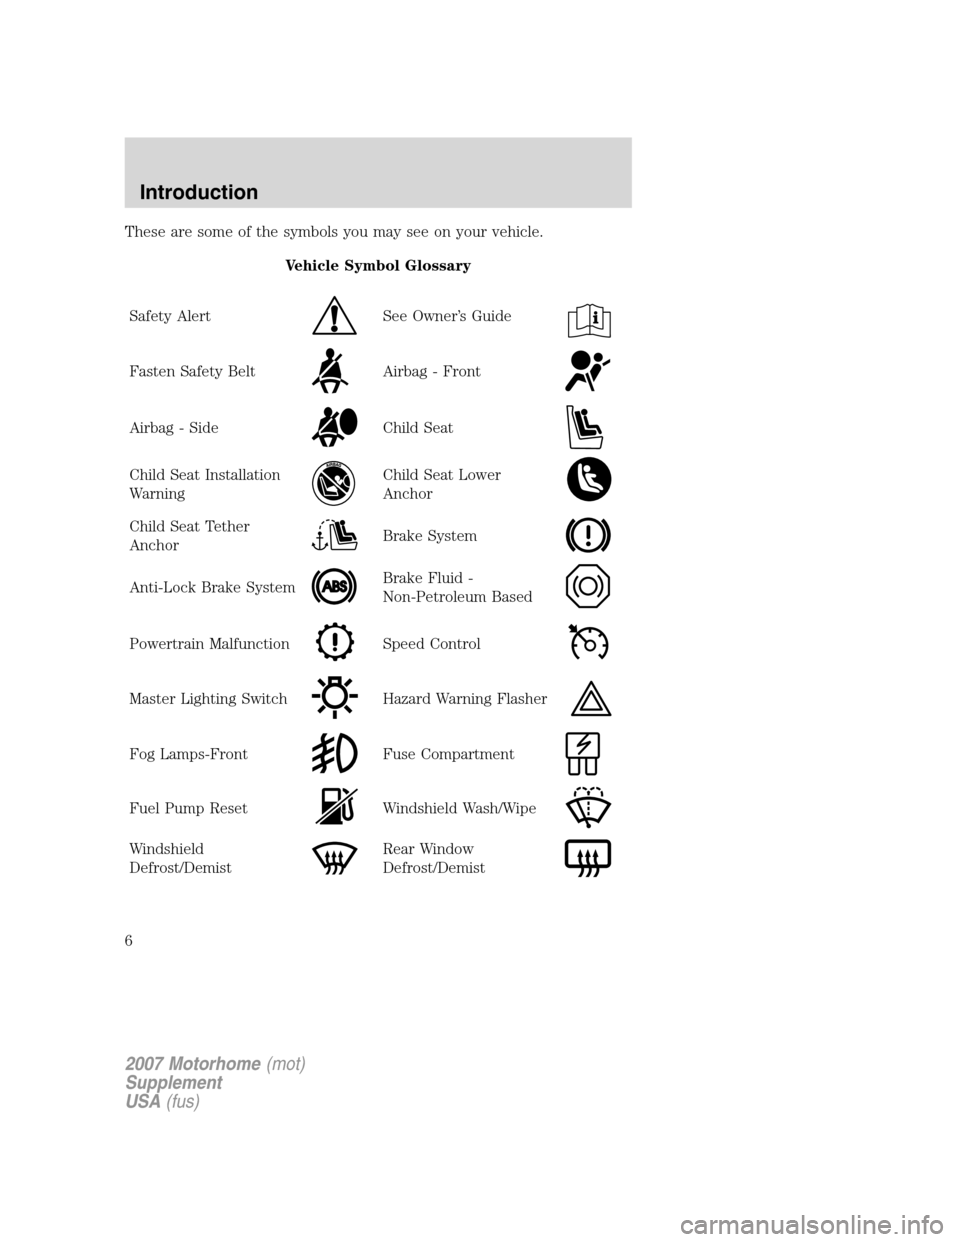 FORD F SERIES MOTORHOME AND COMMERCIAL CHASSIS 2007 11.G Owners Manual These are some of the symbols you may see on your vehicle.
Vehicle Symbol Glossary
Safety Alert
See Owner’s Guide
Fasten Safety BeltAirbag - Front
Airbag - SideChild Seat
Child Seat Installation
War